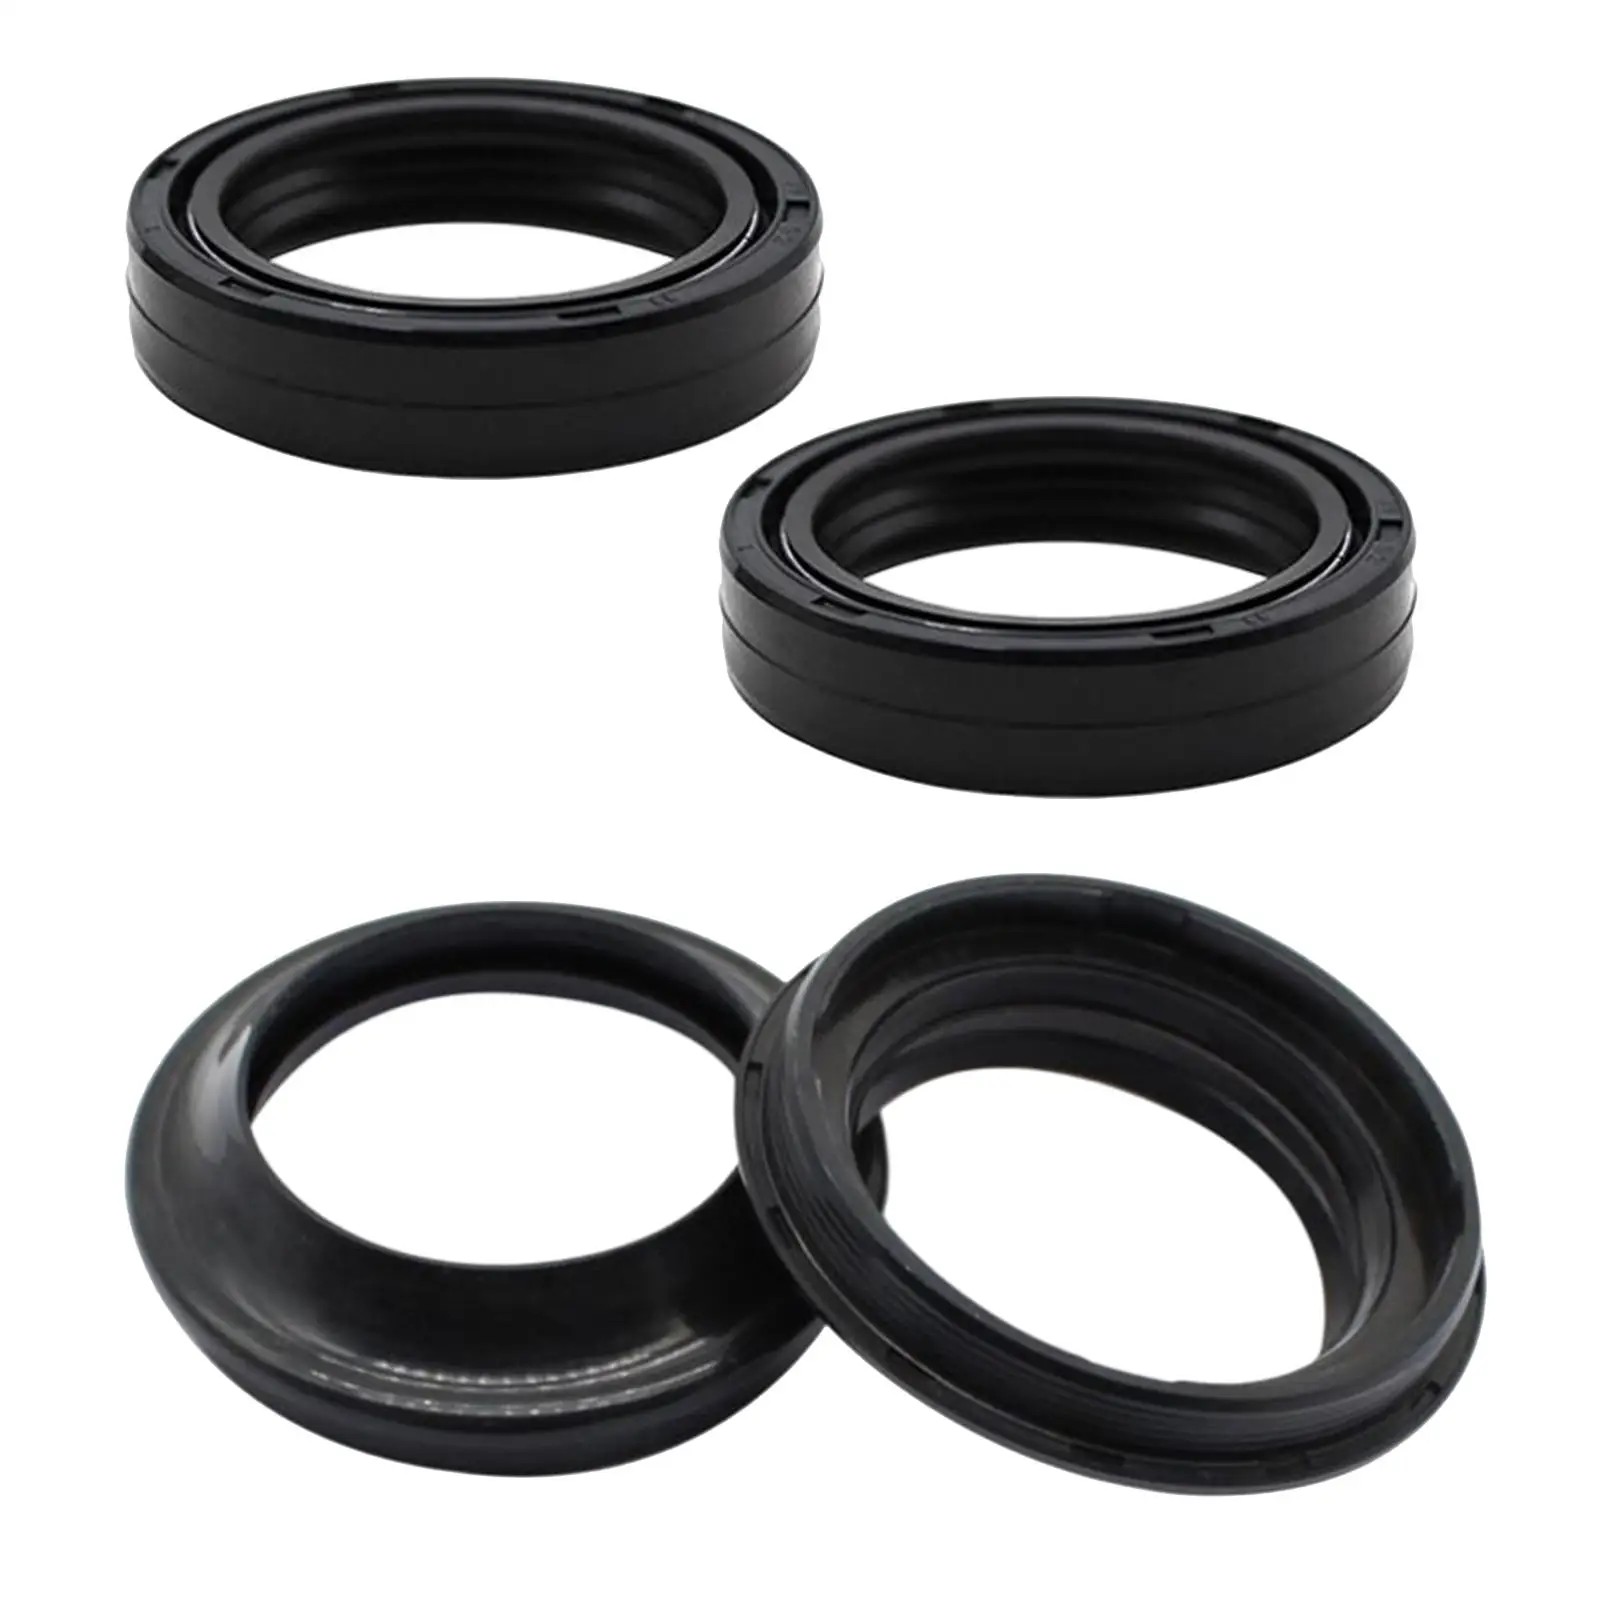 Motorbike Front Fork Shock Oil Seal and Dust Seal Set for Suzuki Rm-Z450 Dr-Z400S